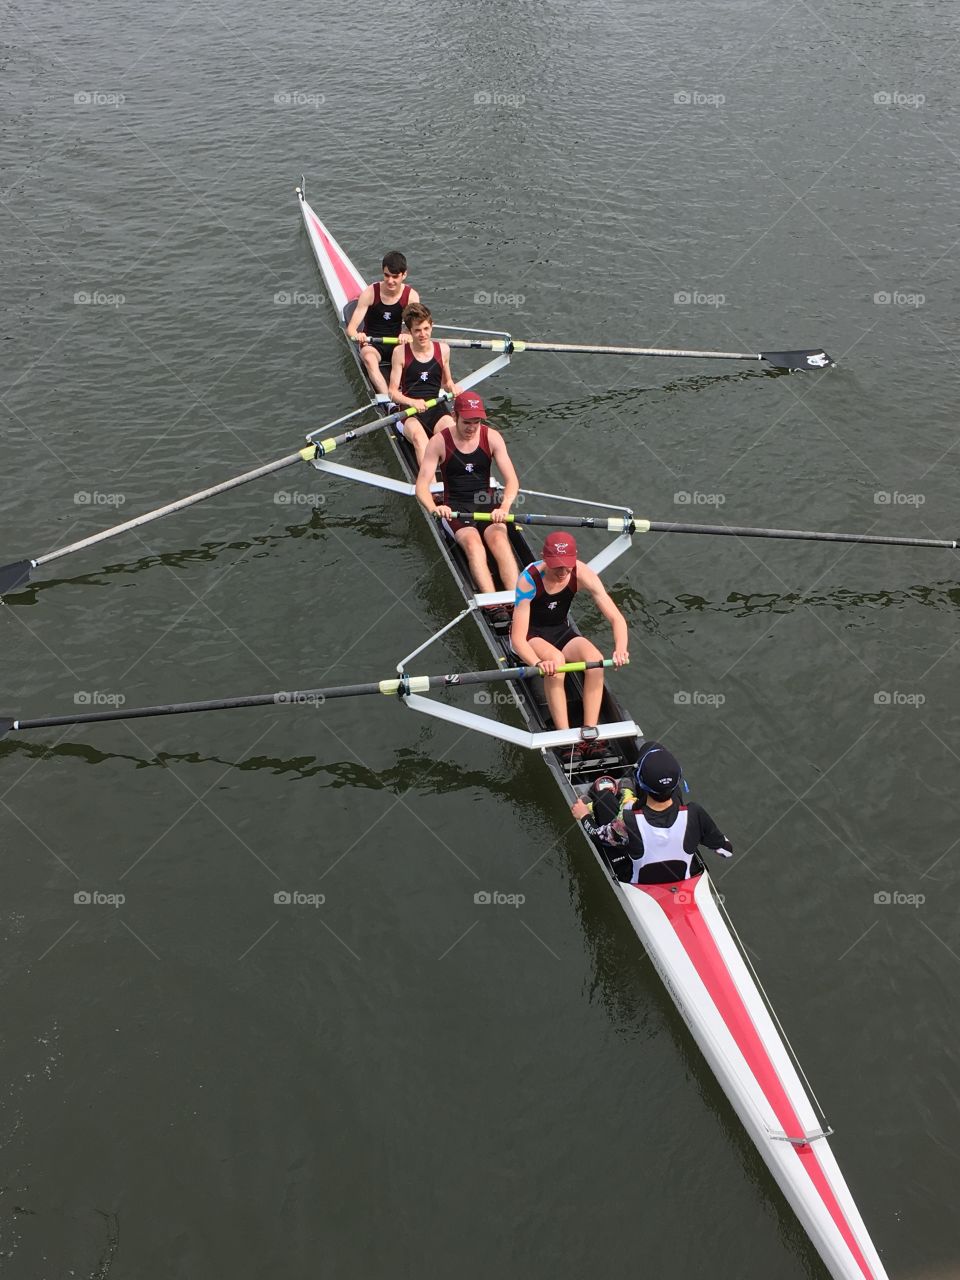 Rowing pictures really good Buy them